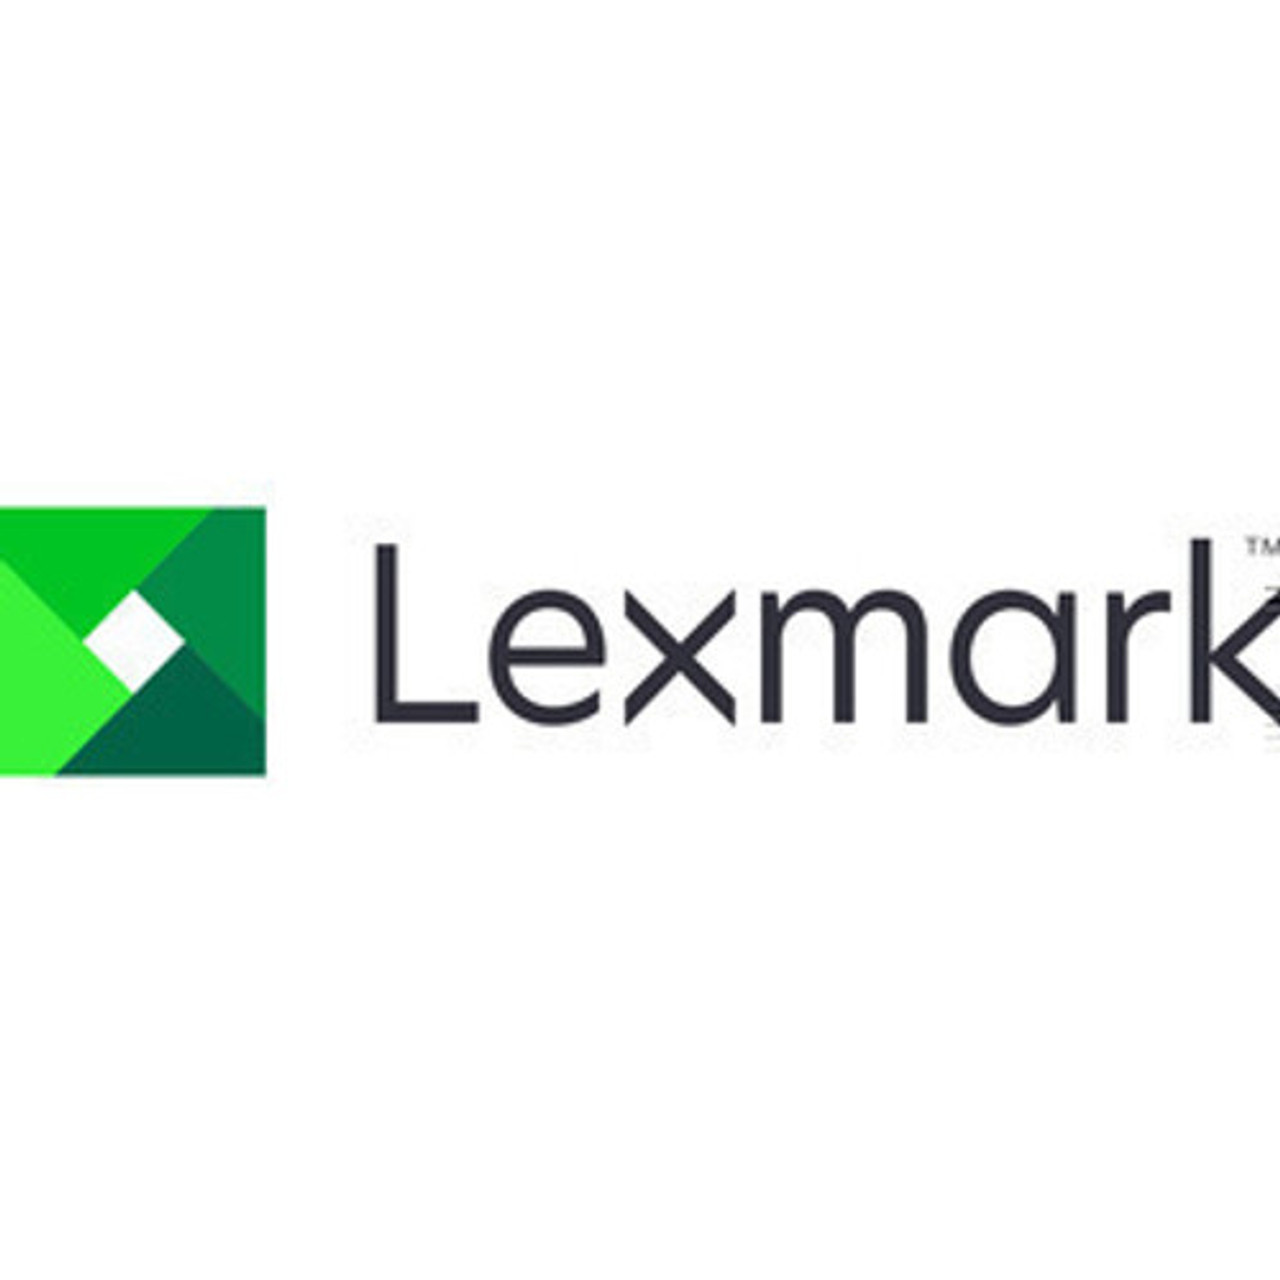 Lexmark 3YR PARTS ONLY MS531   SVCS - 2374768